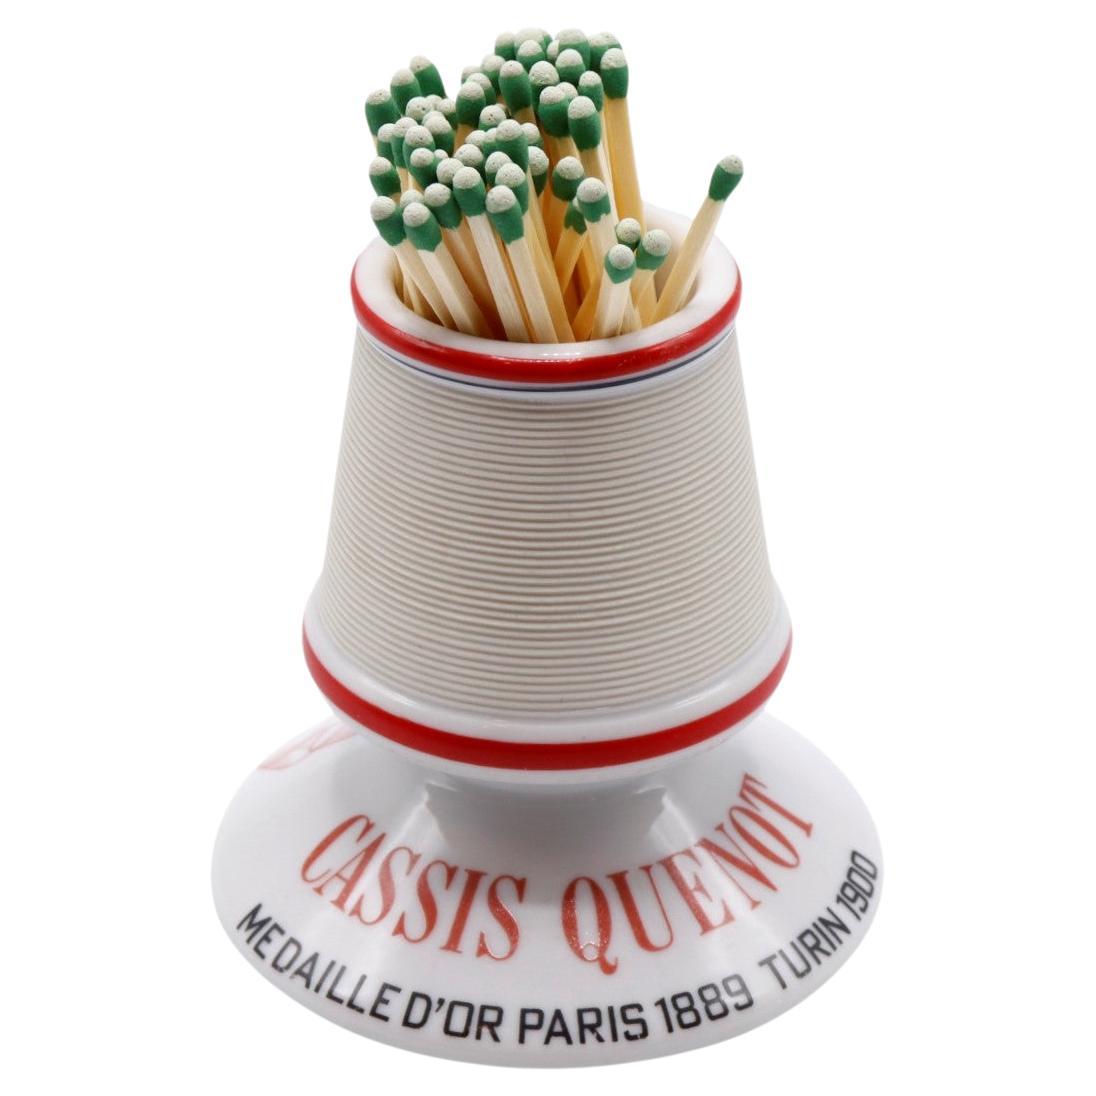 Cassis Quenot French Ceramic